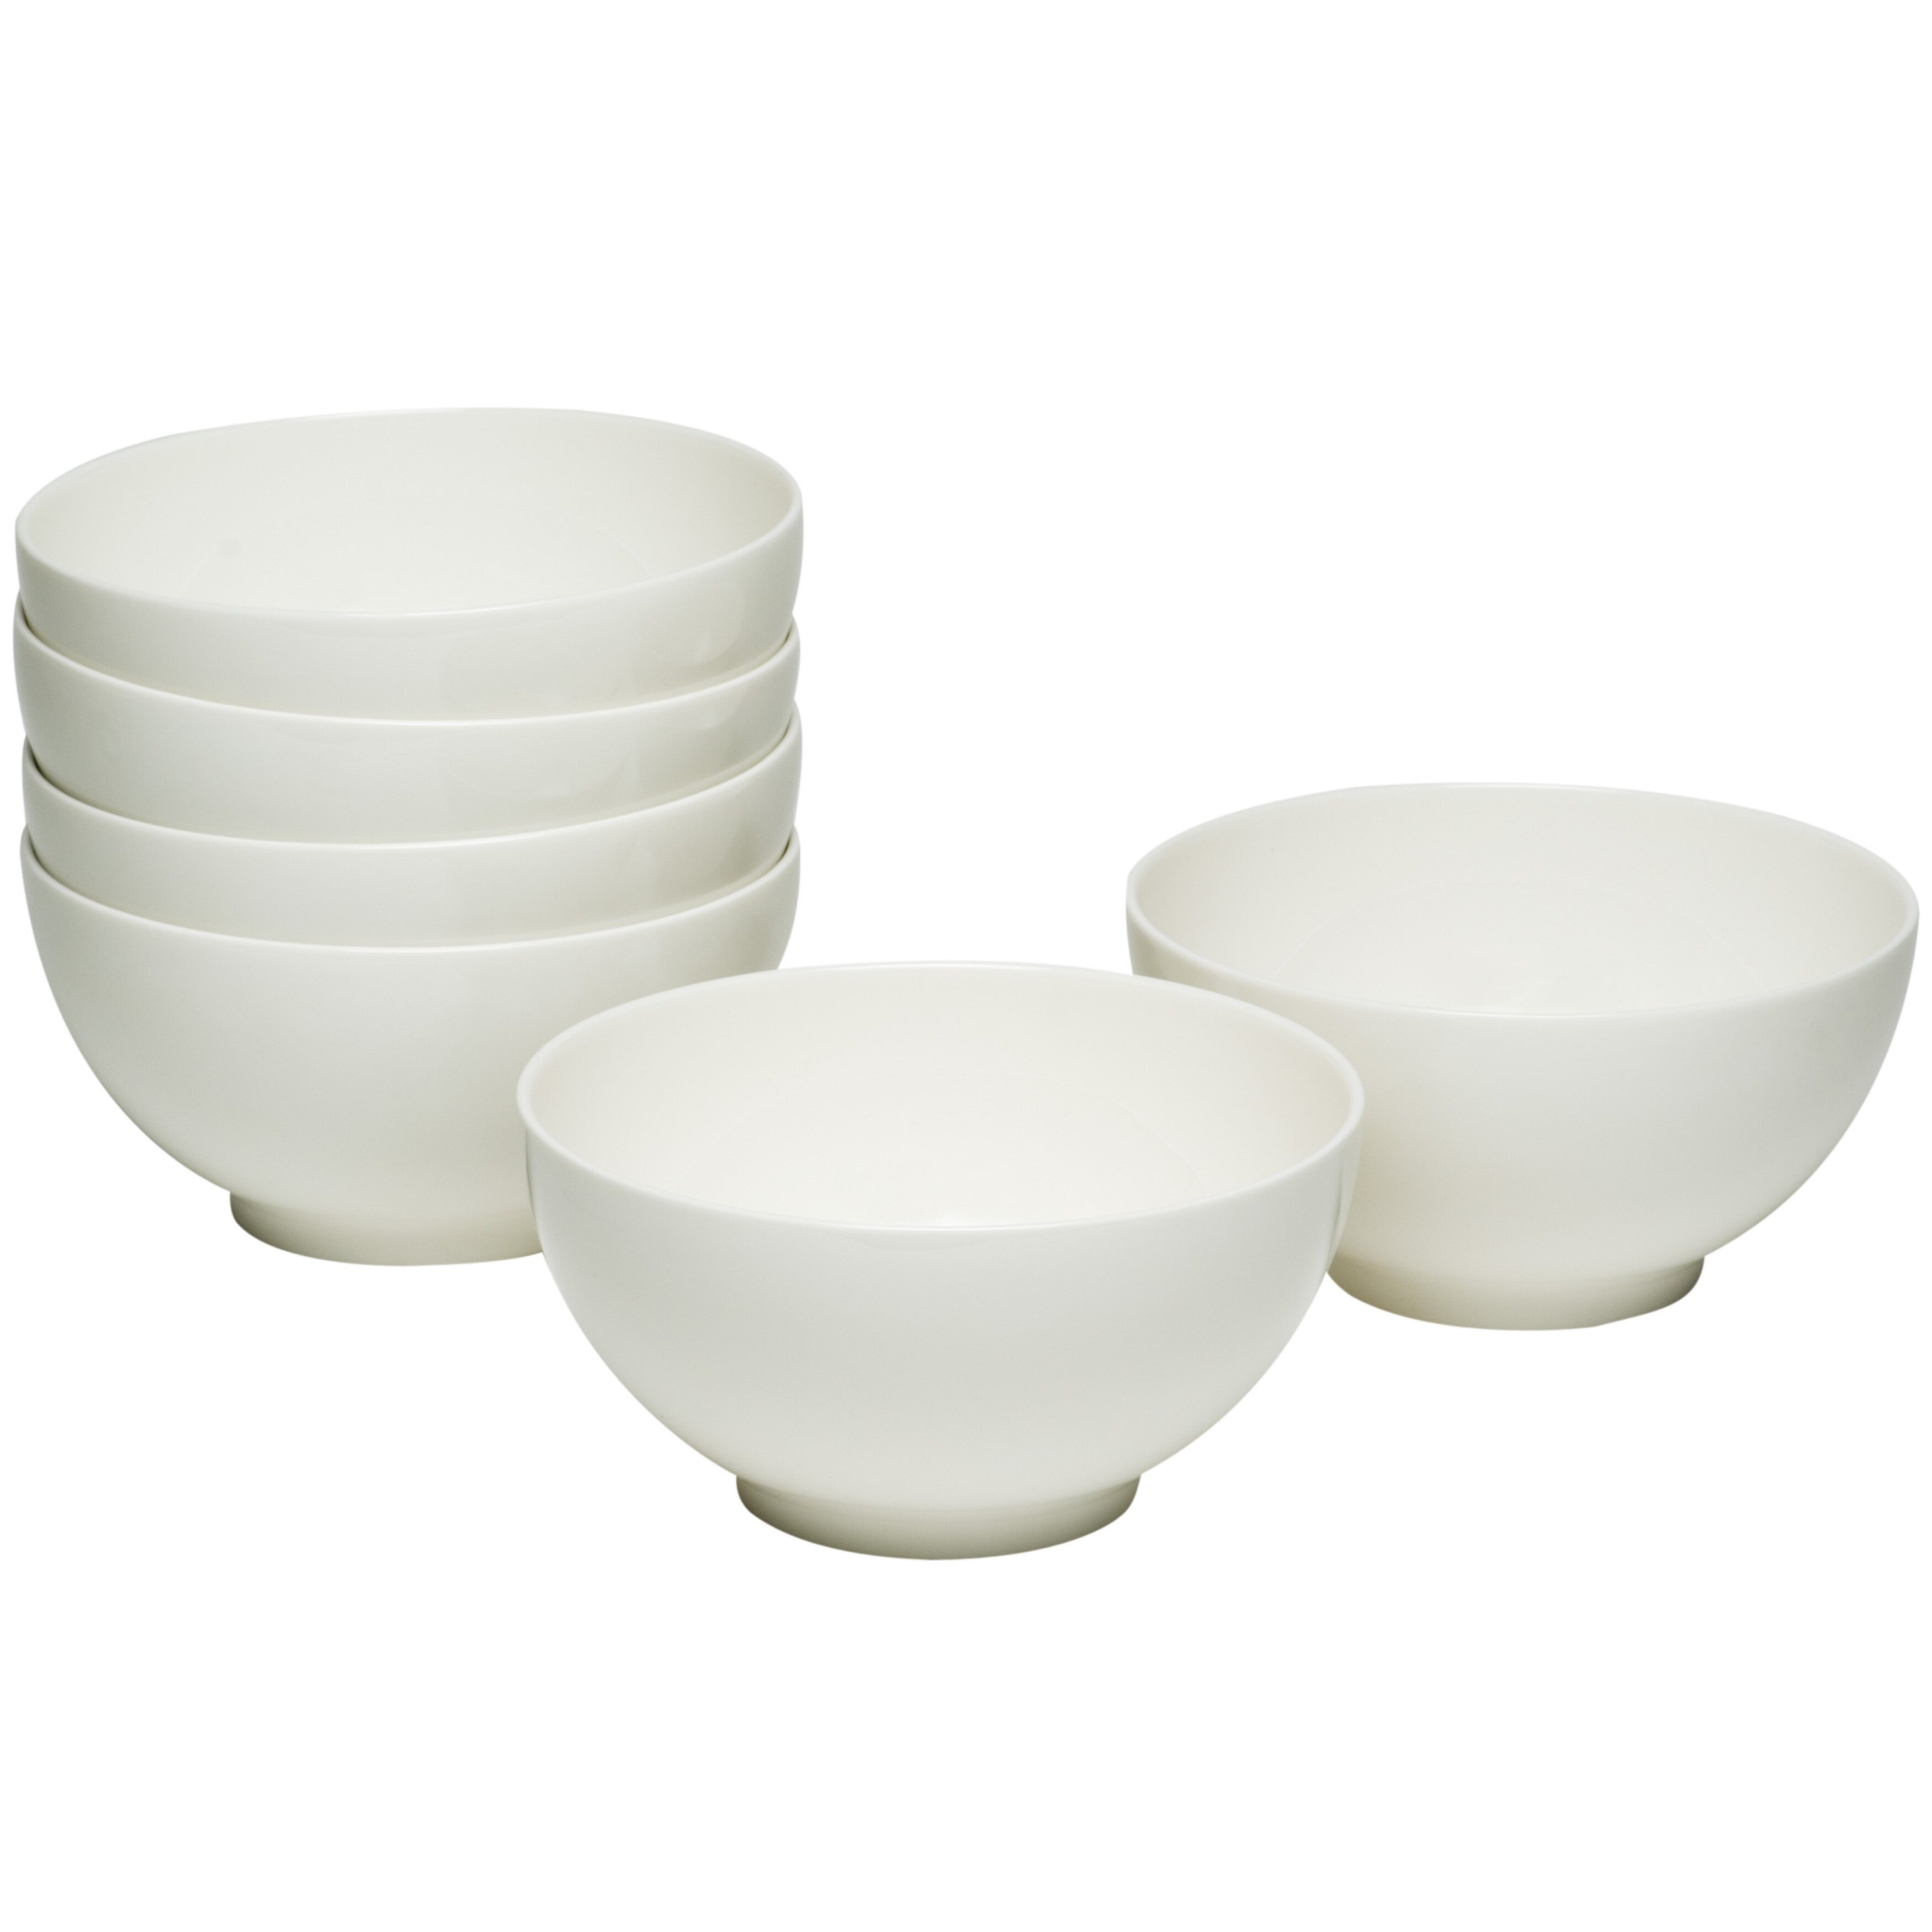 MALACASA Blance 10.75-inch Ivory White Porcelain Soup Pot in the